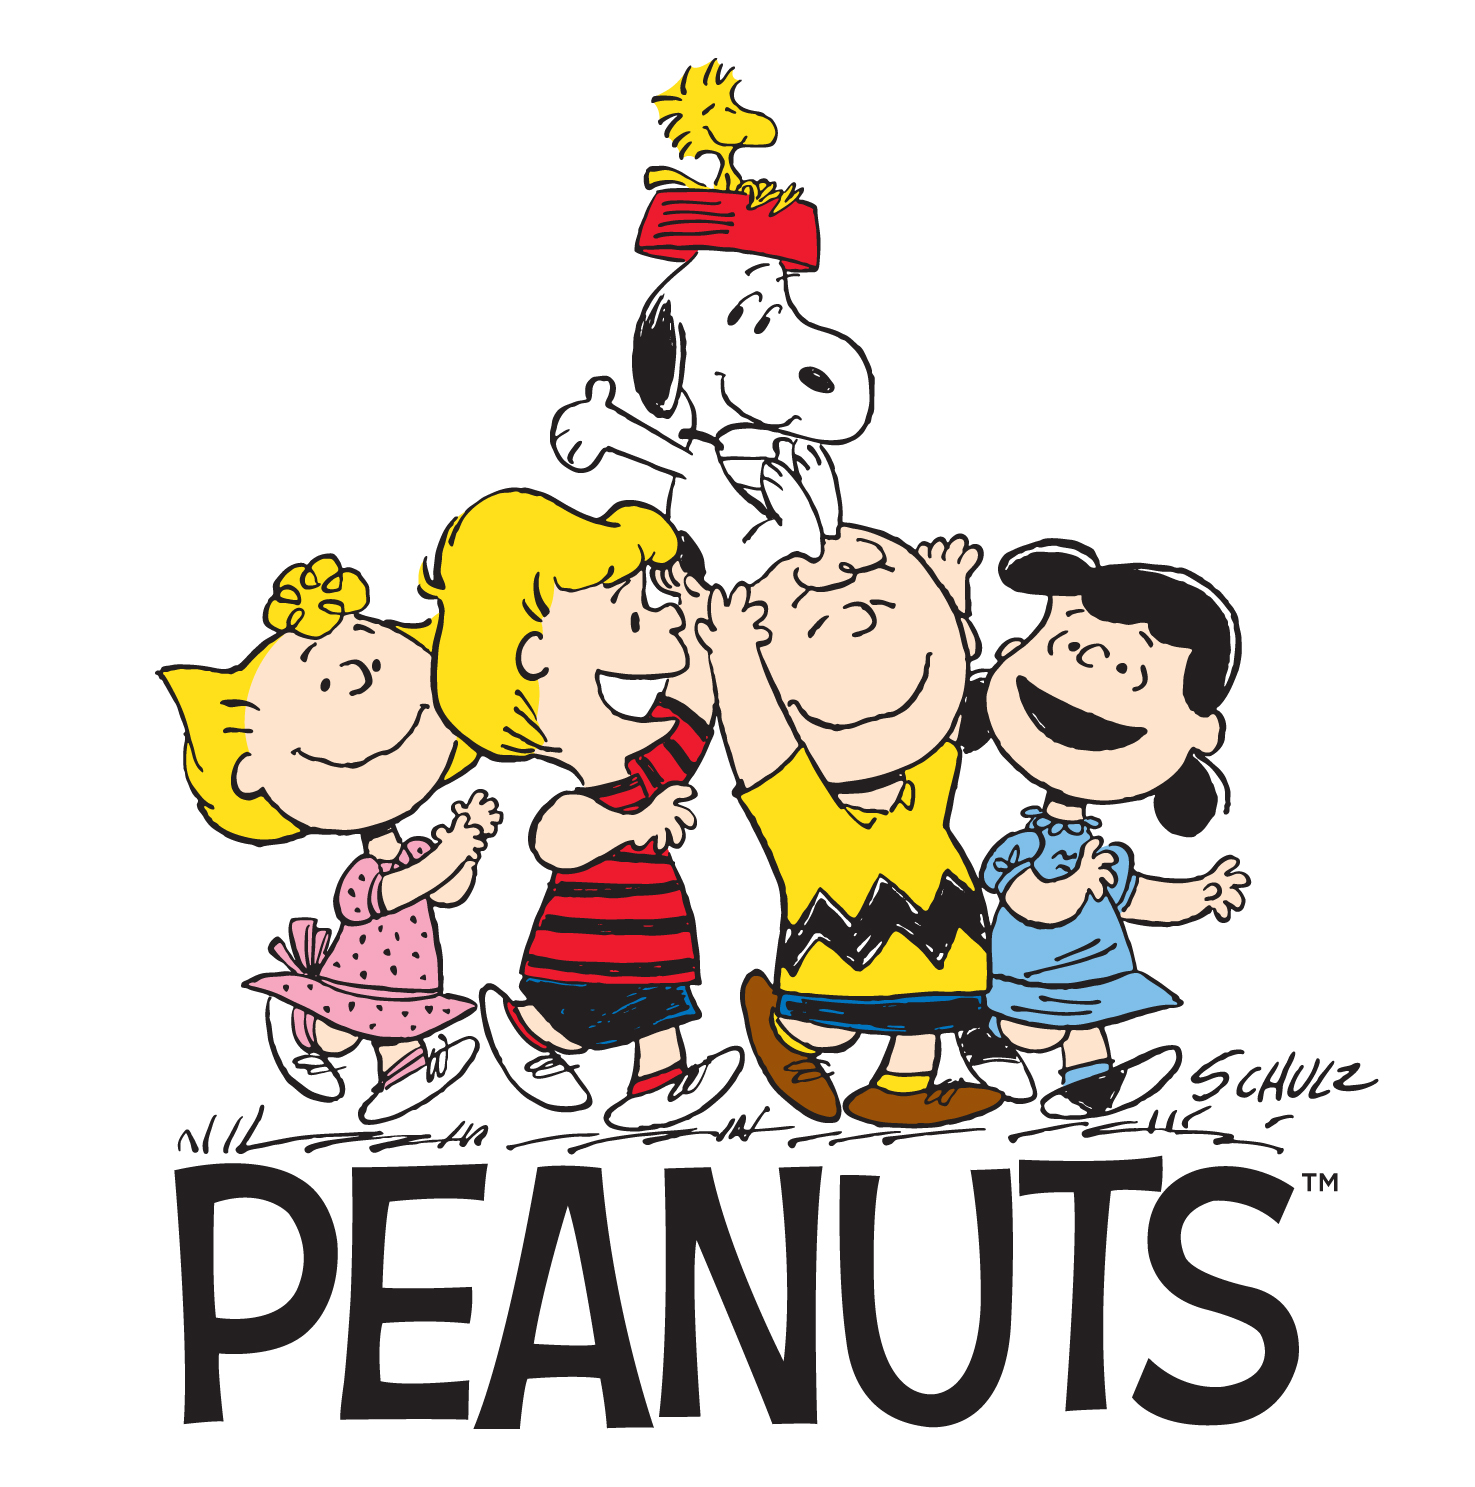 And Peanuts Worldwide Announce Iconic Peanuts Gang To Hit Theaters